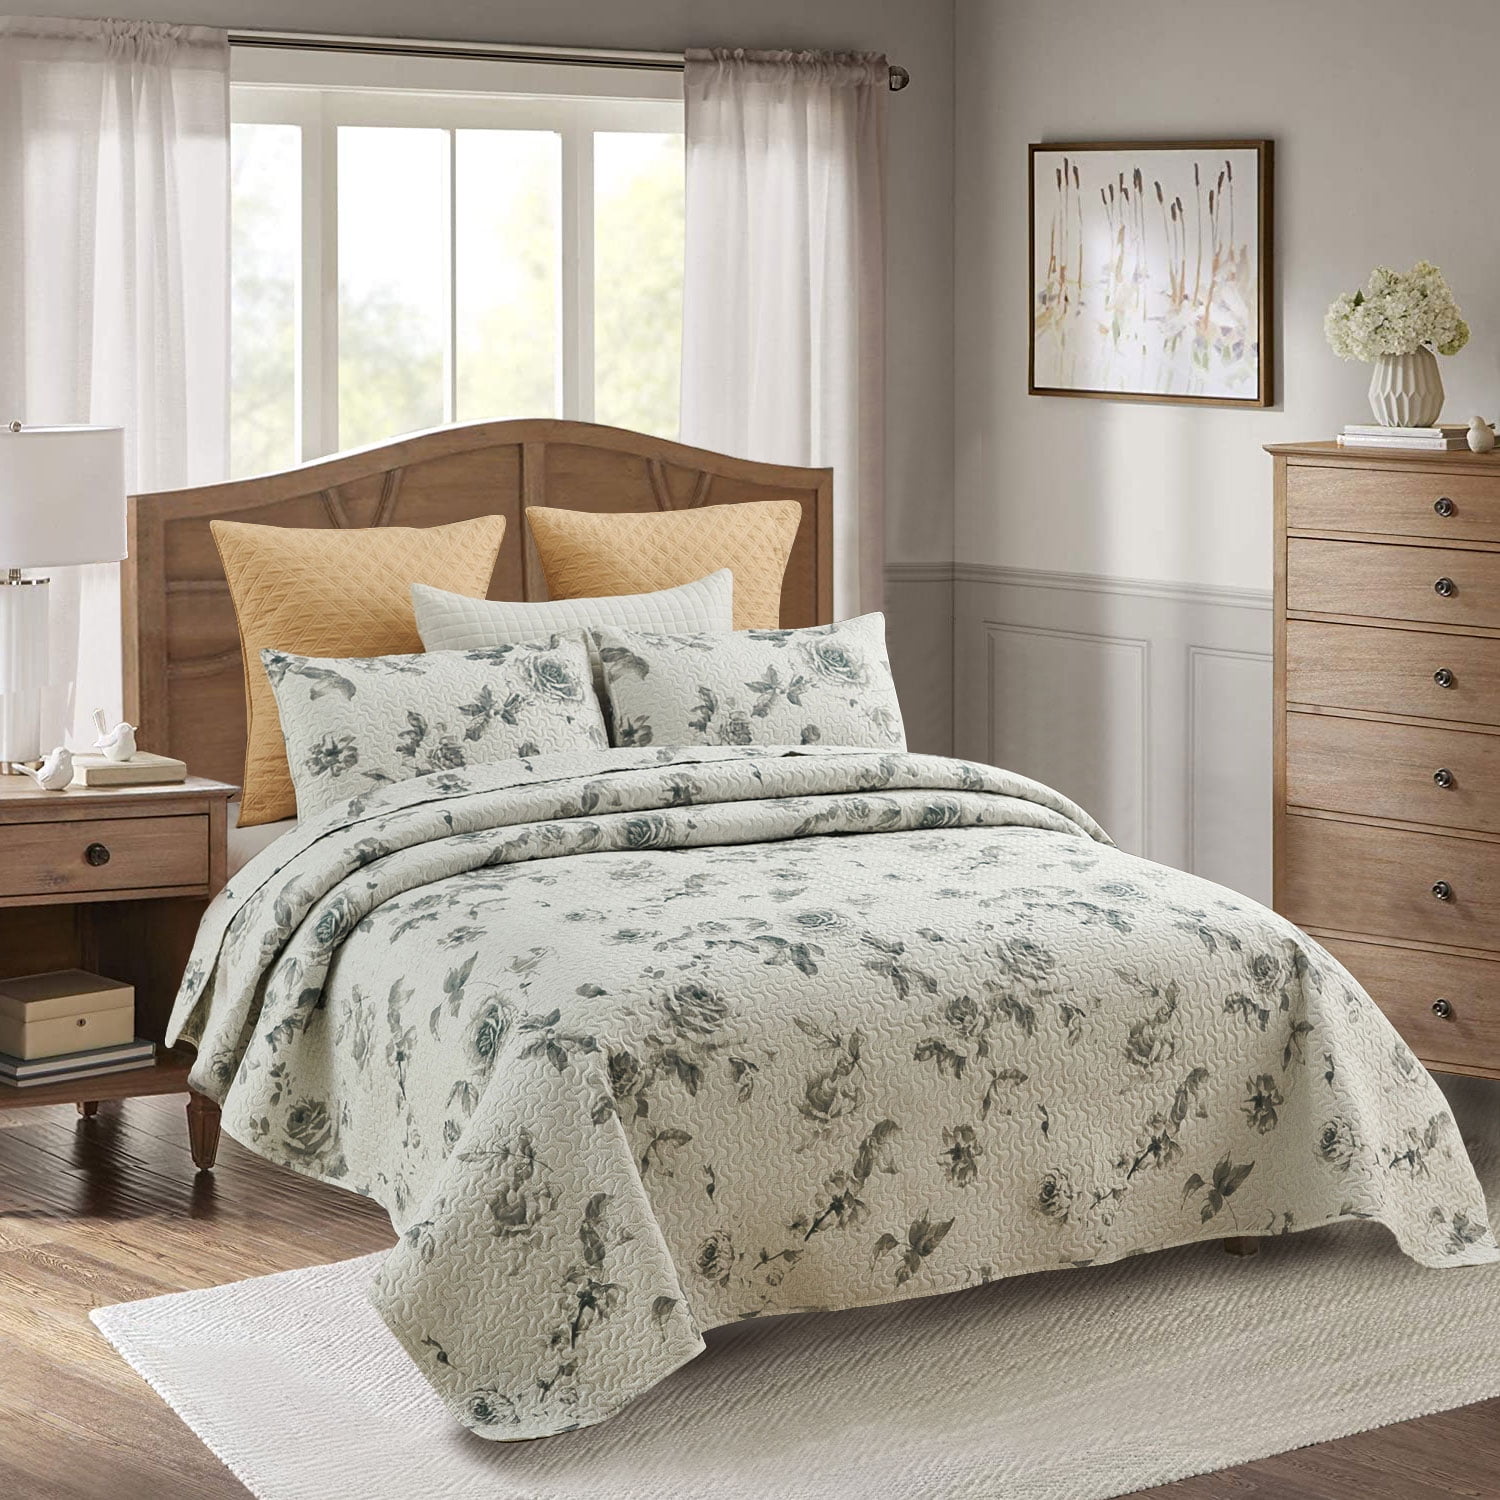 Details about   Winter Quilted Bedspread & Pillow Shams Set Gentle Snow Feminine Print 